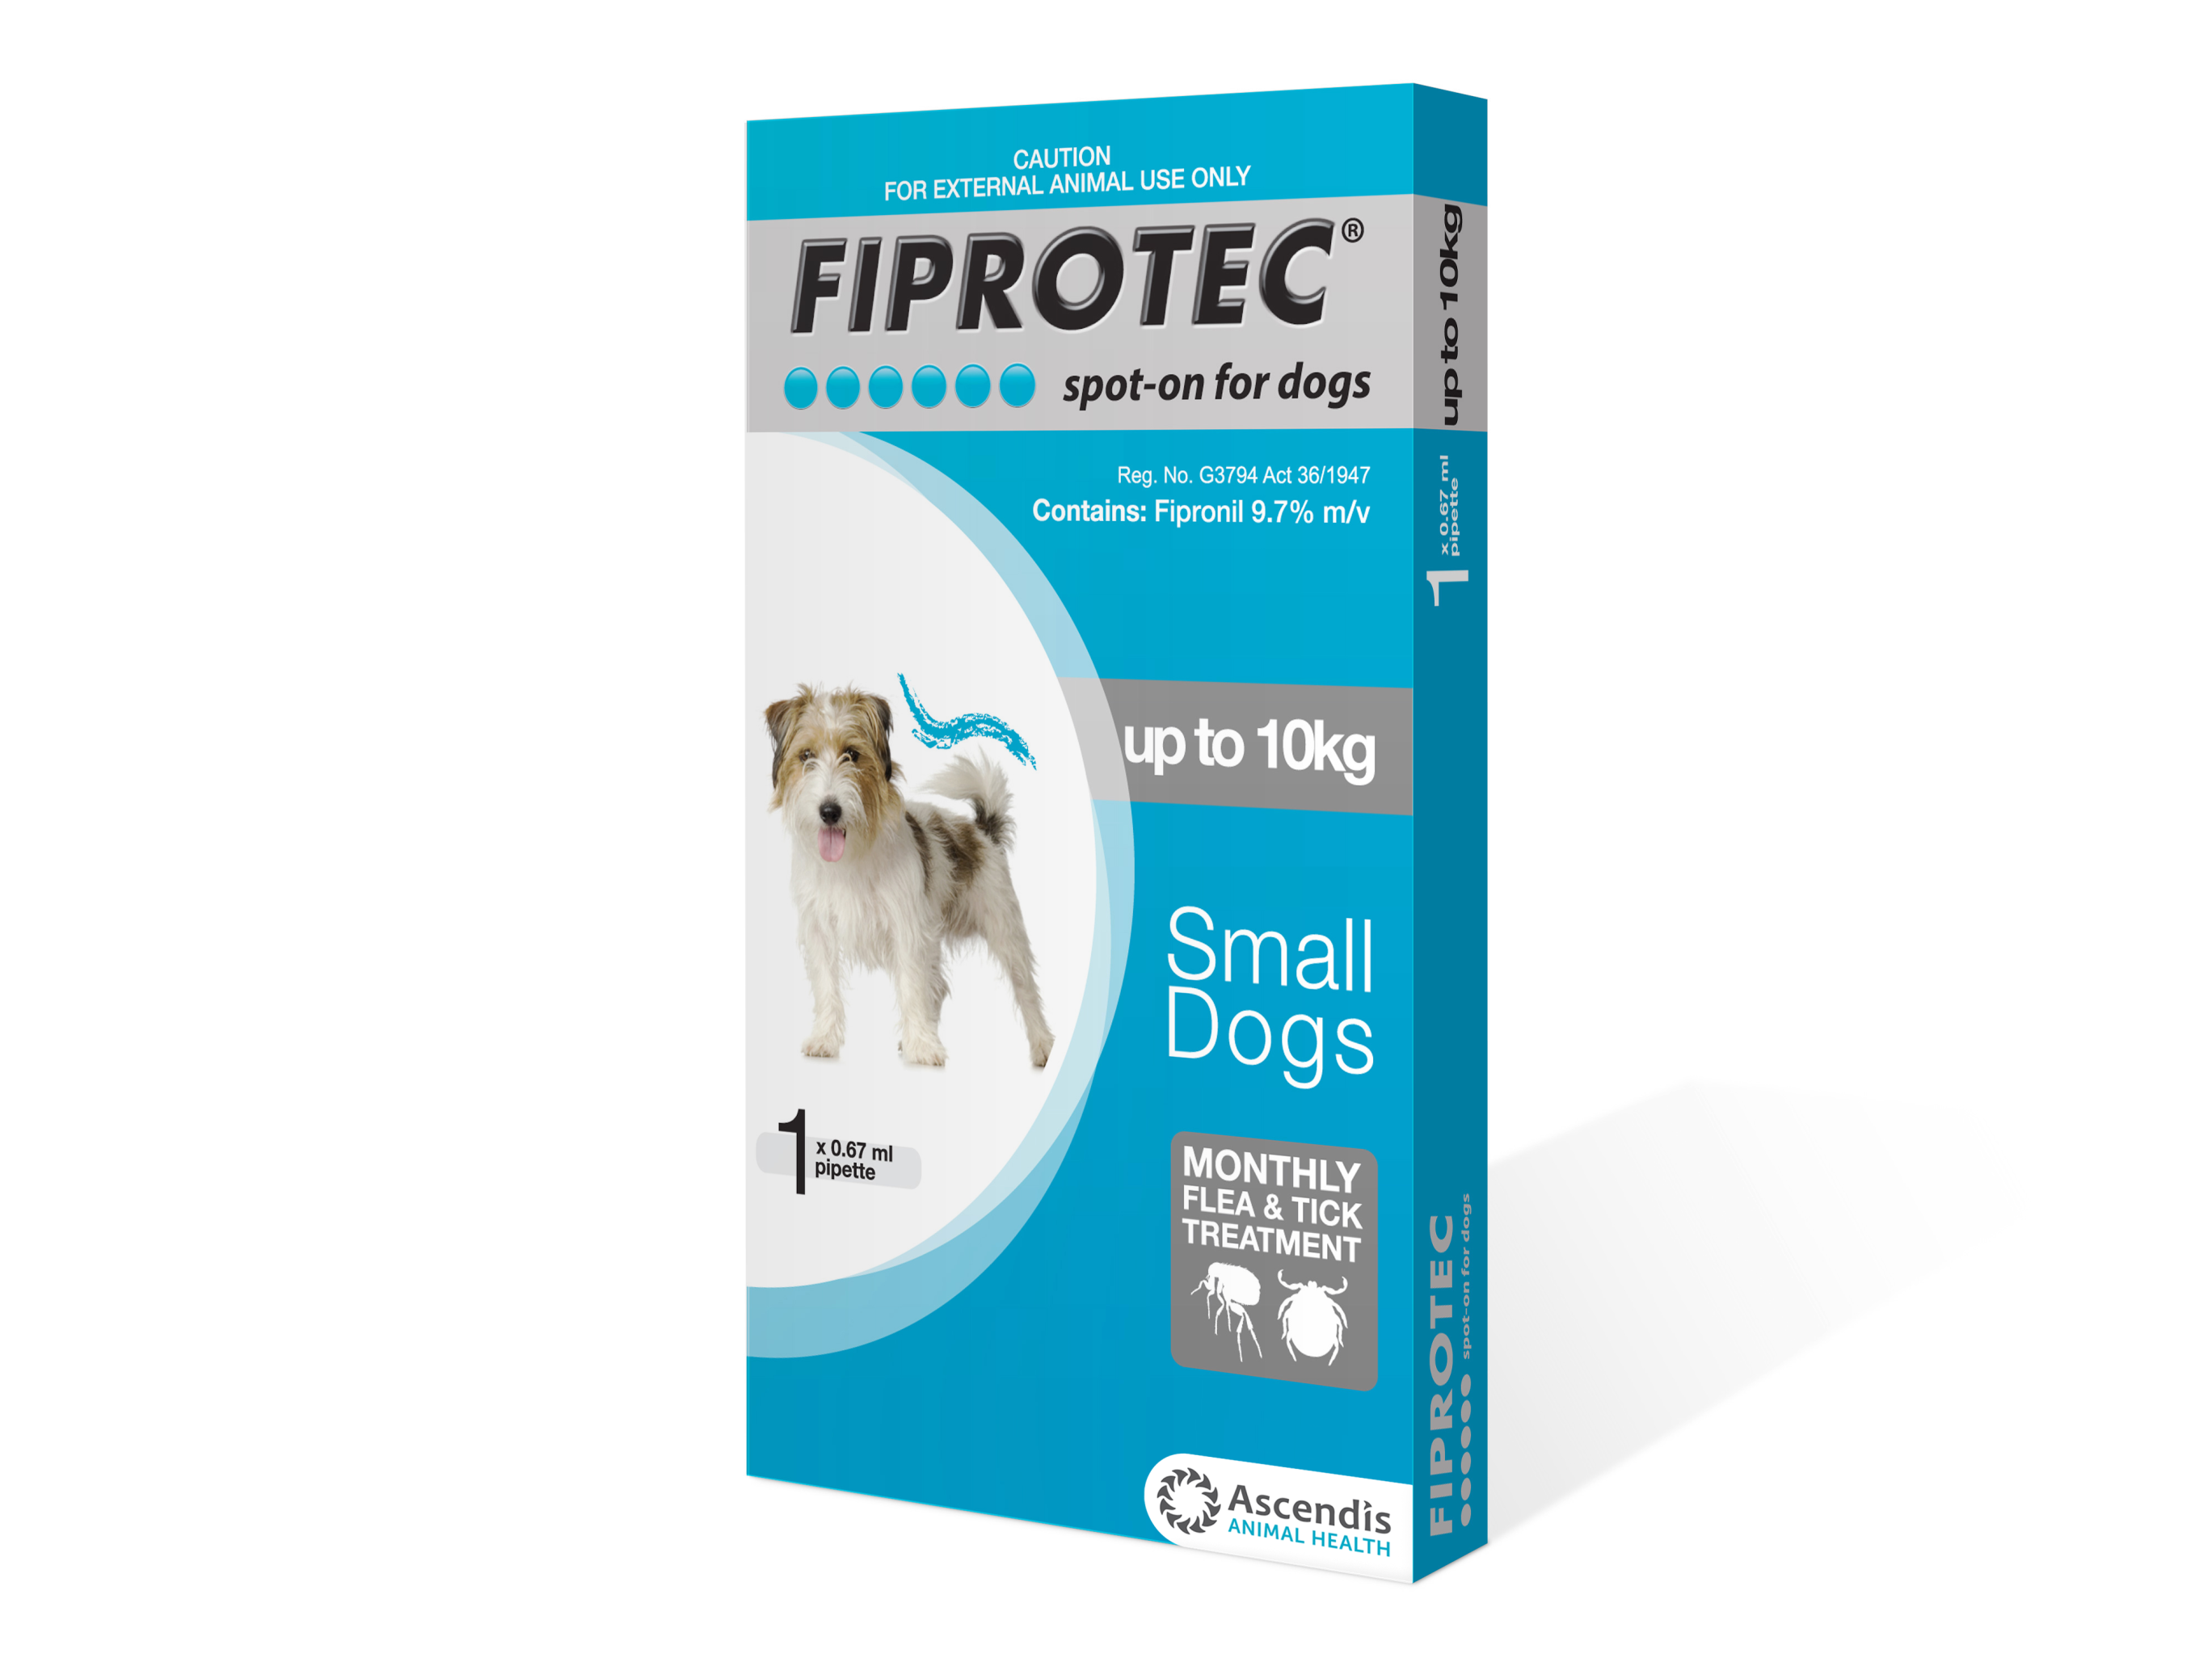 Fiprotec Spot On for Small Dogs